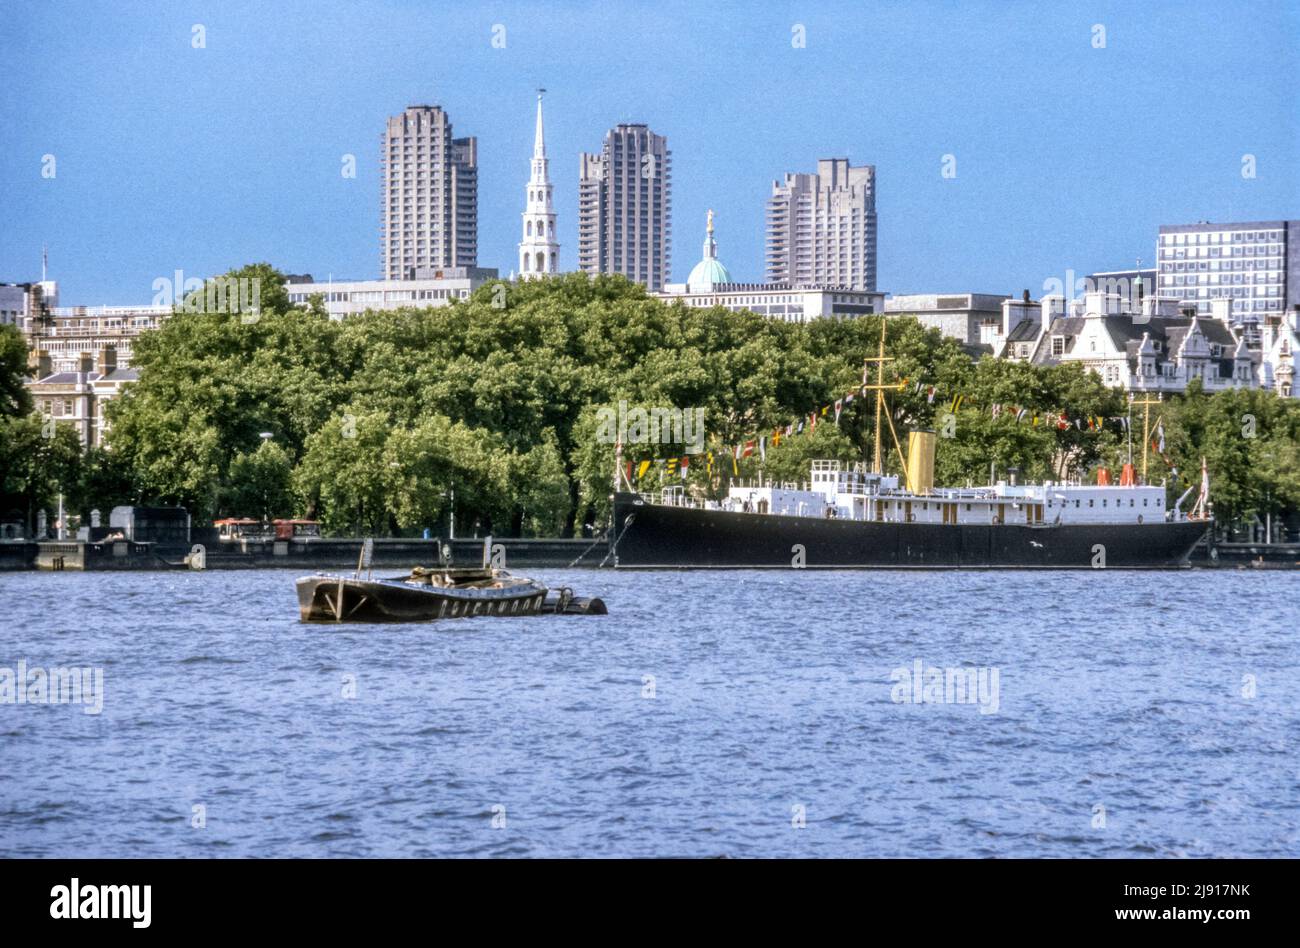 1982 archive image of London skyline seen across River Thames from South Bank - showing towers of the Barbican, spire of St Bride's church and dome of the Old Bailey.  The boat moored on the north bank is HMS Chrysanthemum, an Anchusa class sloop of 1917, scrapped in 1995. Stock Photo